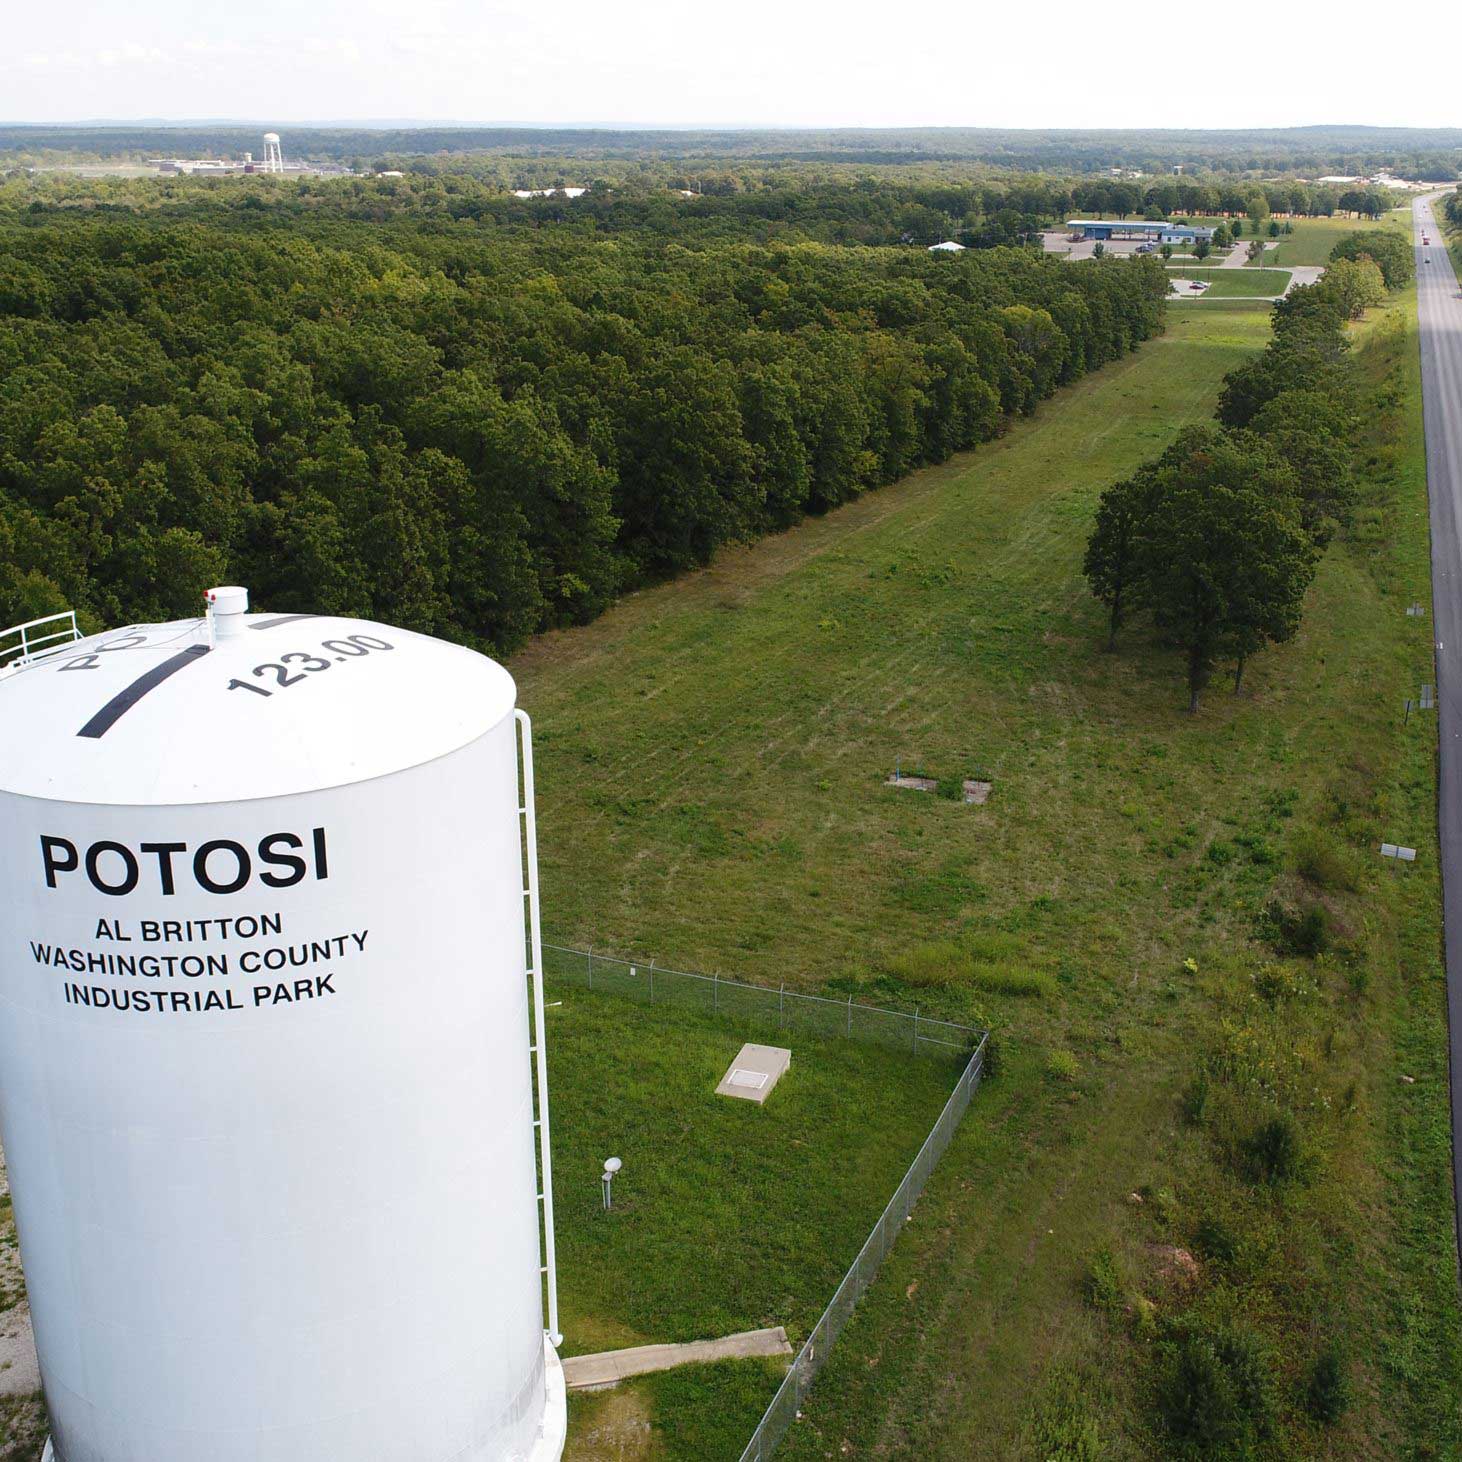 Tower out side the Washington County Industrial Park labeled "Potosi Washington County Park"